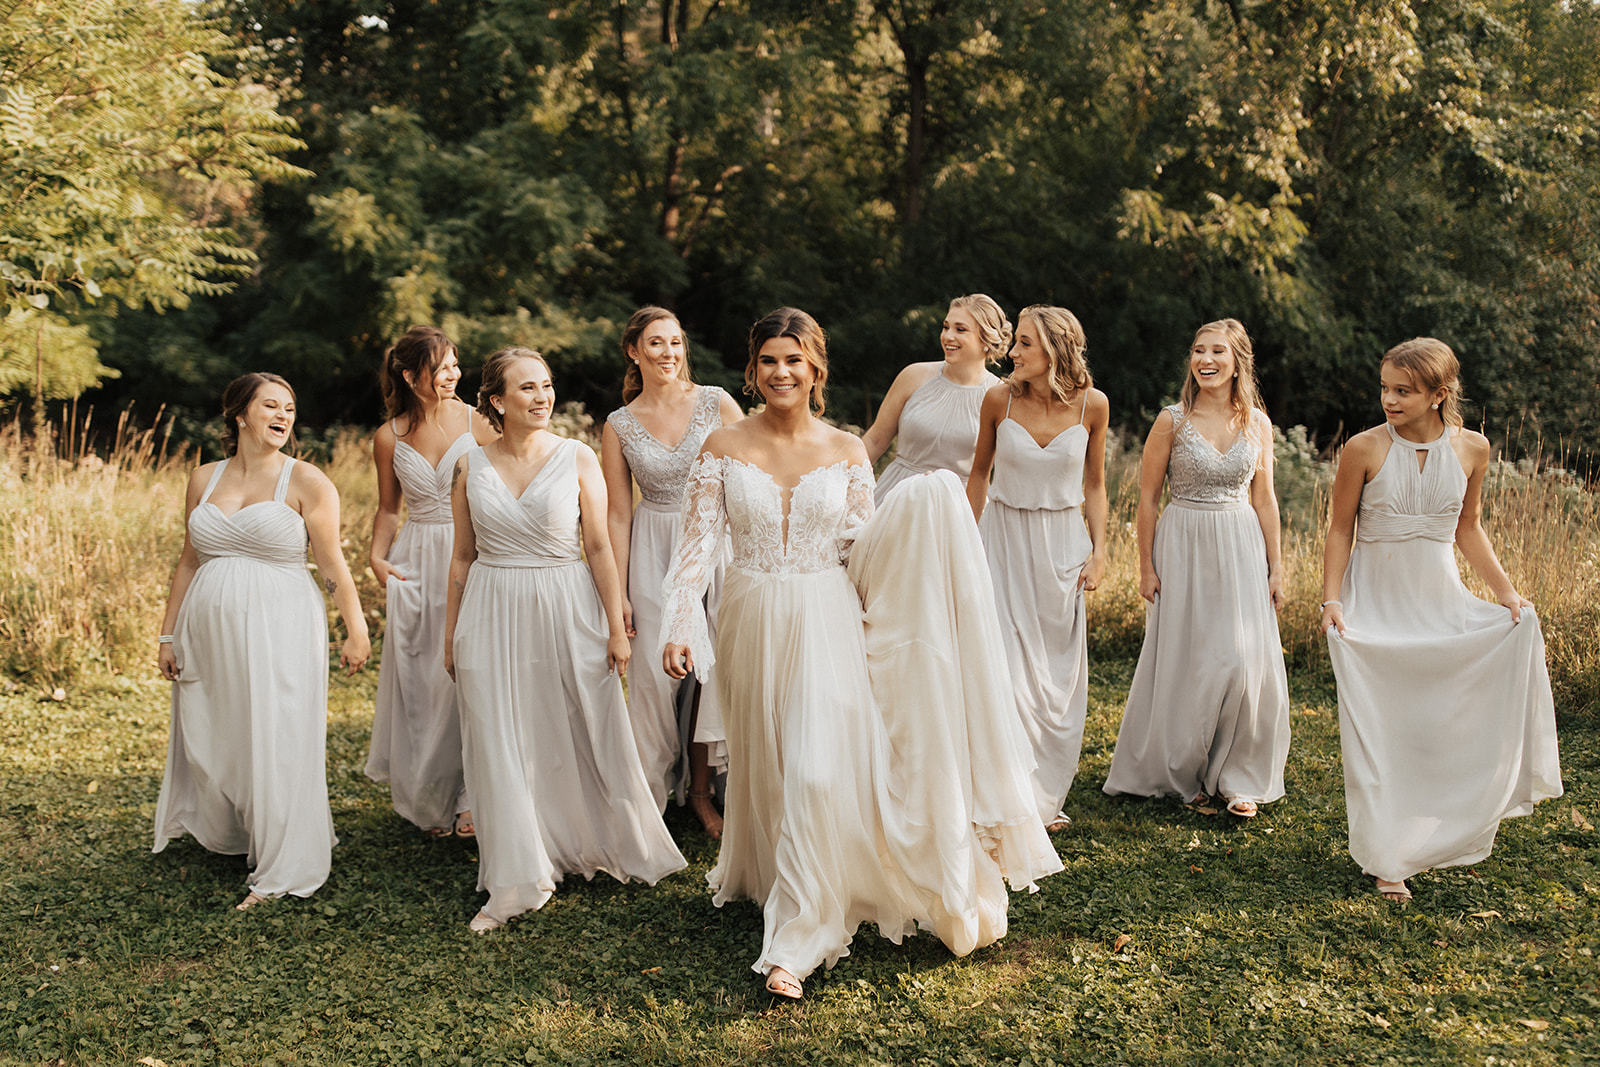 Bride and Bridesmaids wearing Kennedy Blue Bridesmaid Dresses in 'Dew Drop' walking through a field.